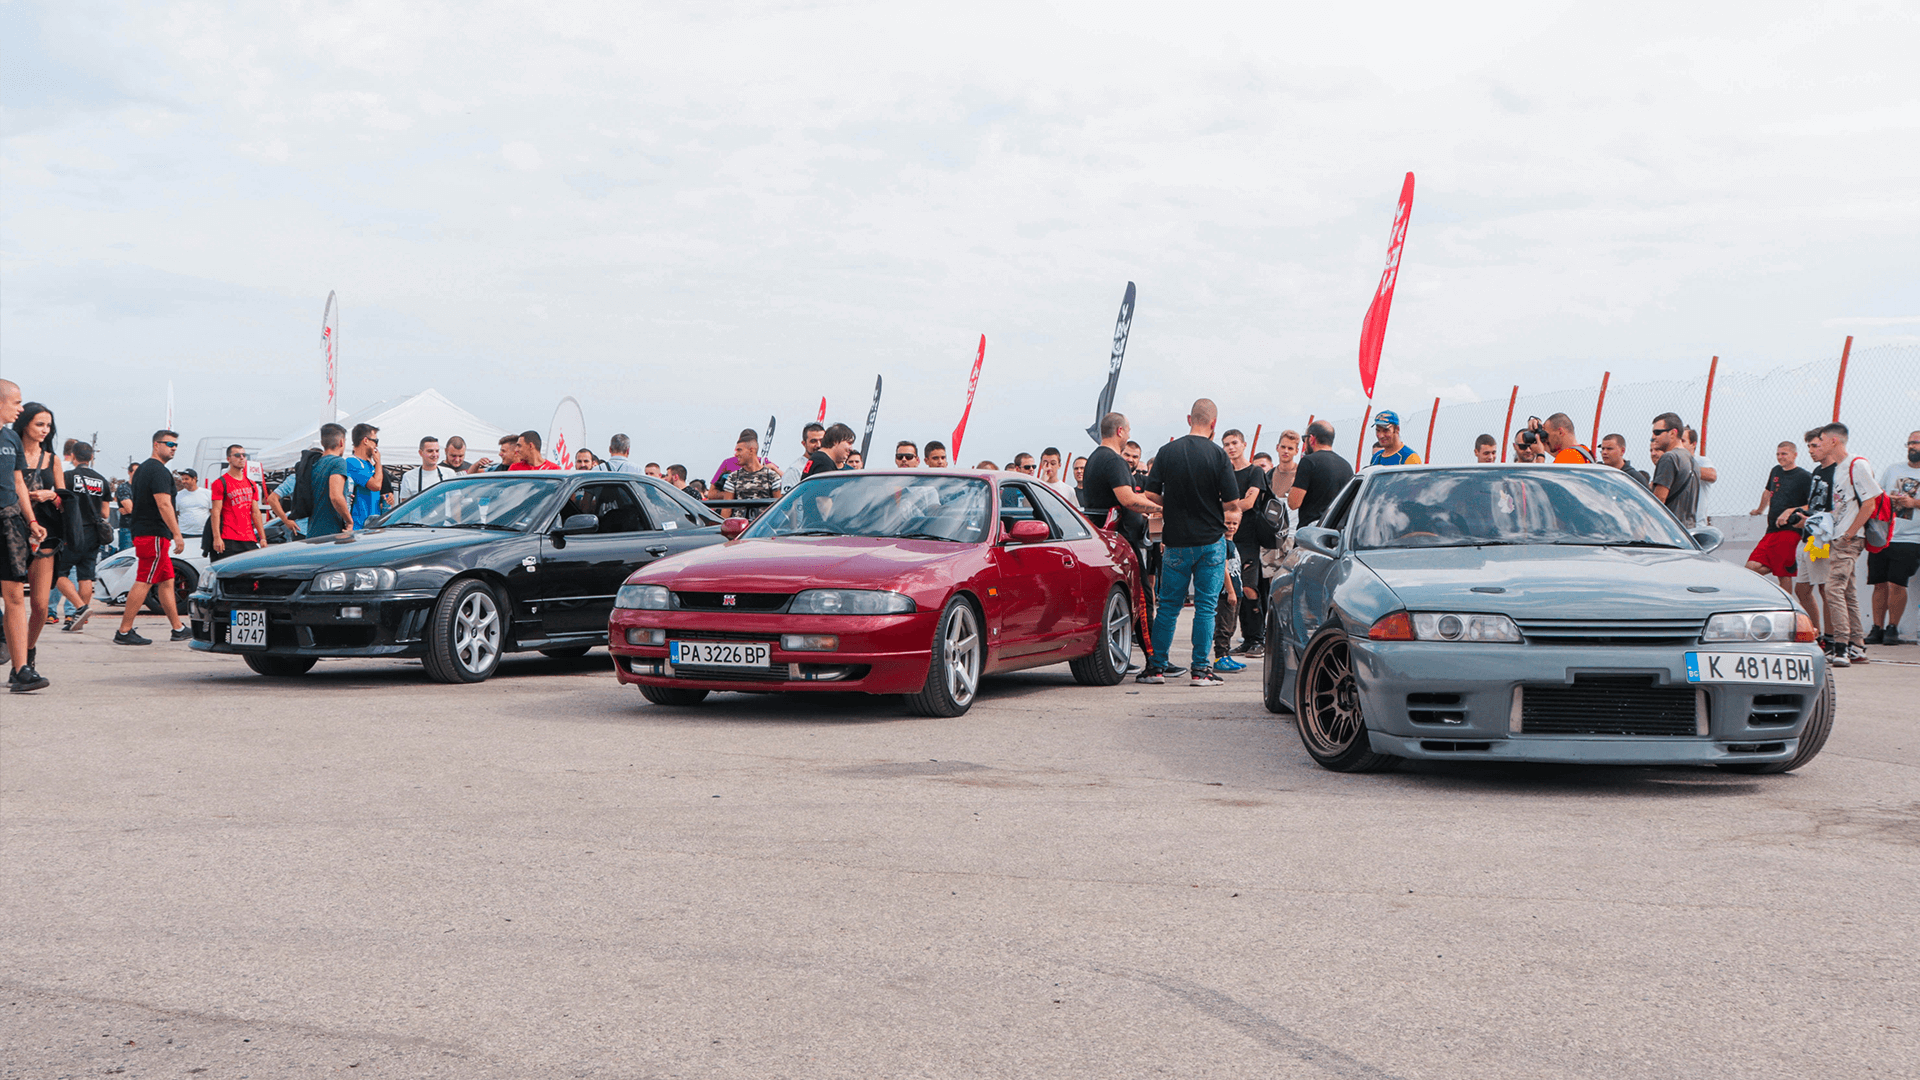 A vibrant event scene with a lineup of diverse cars and enthusiastic people gathered around, showcasing the community's passion for automotive culture.